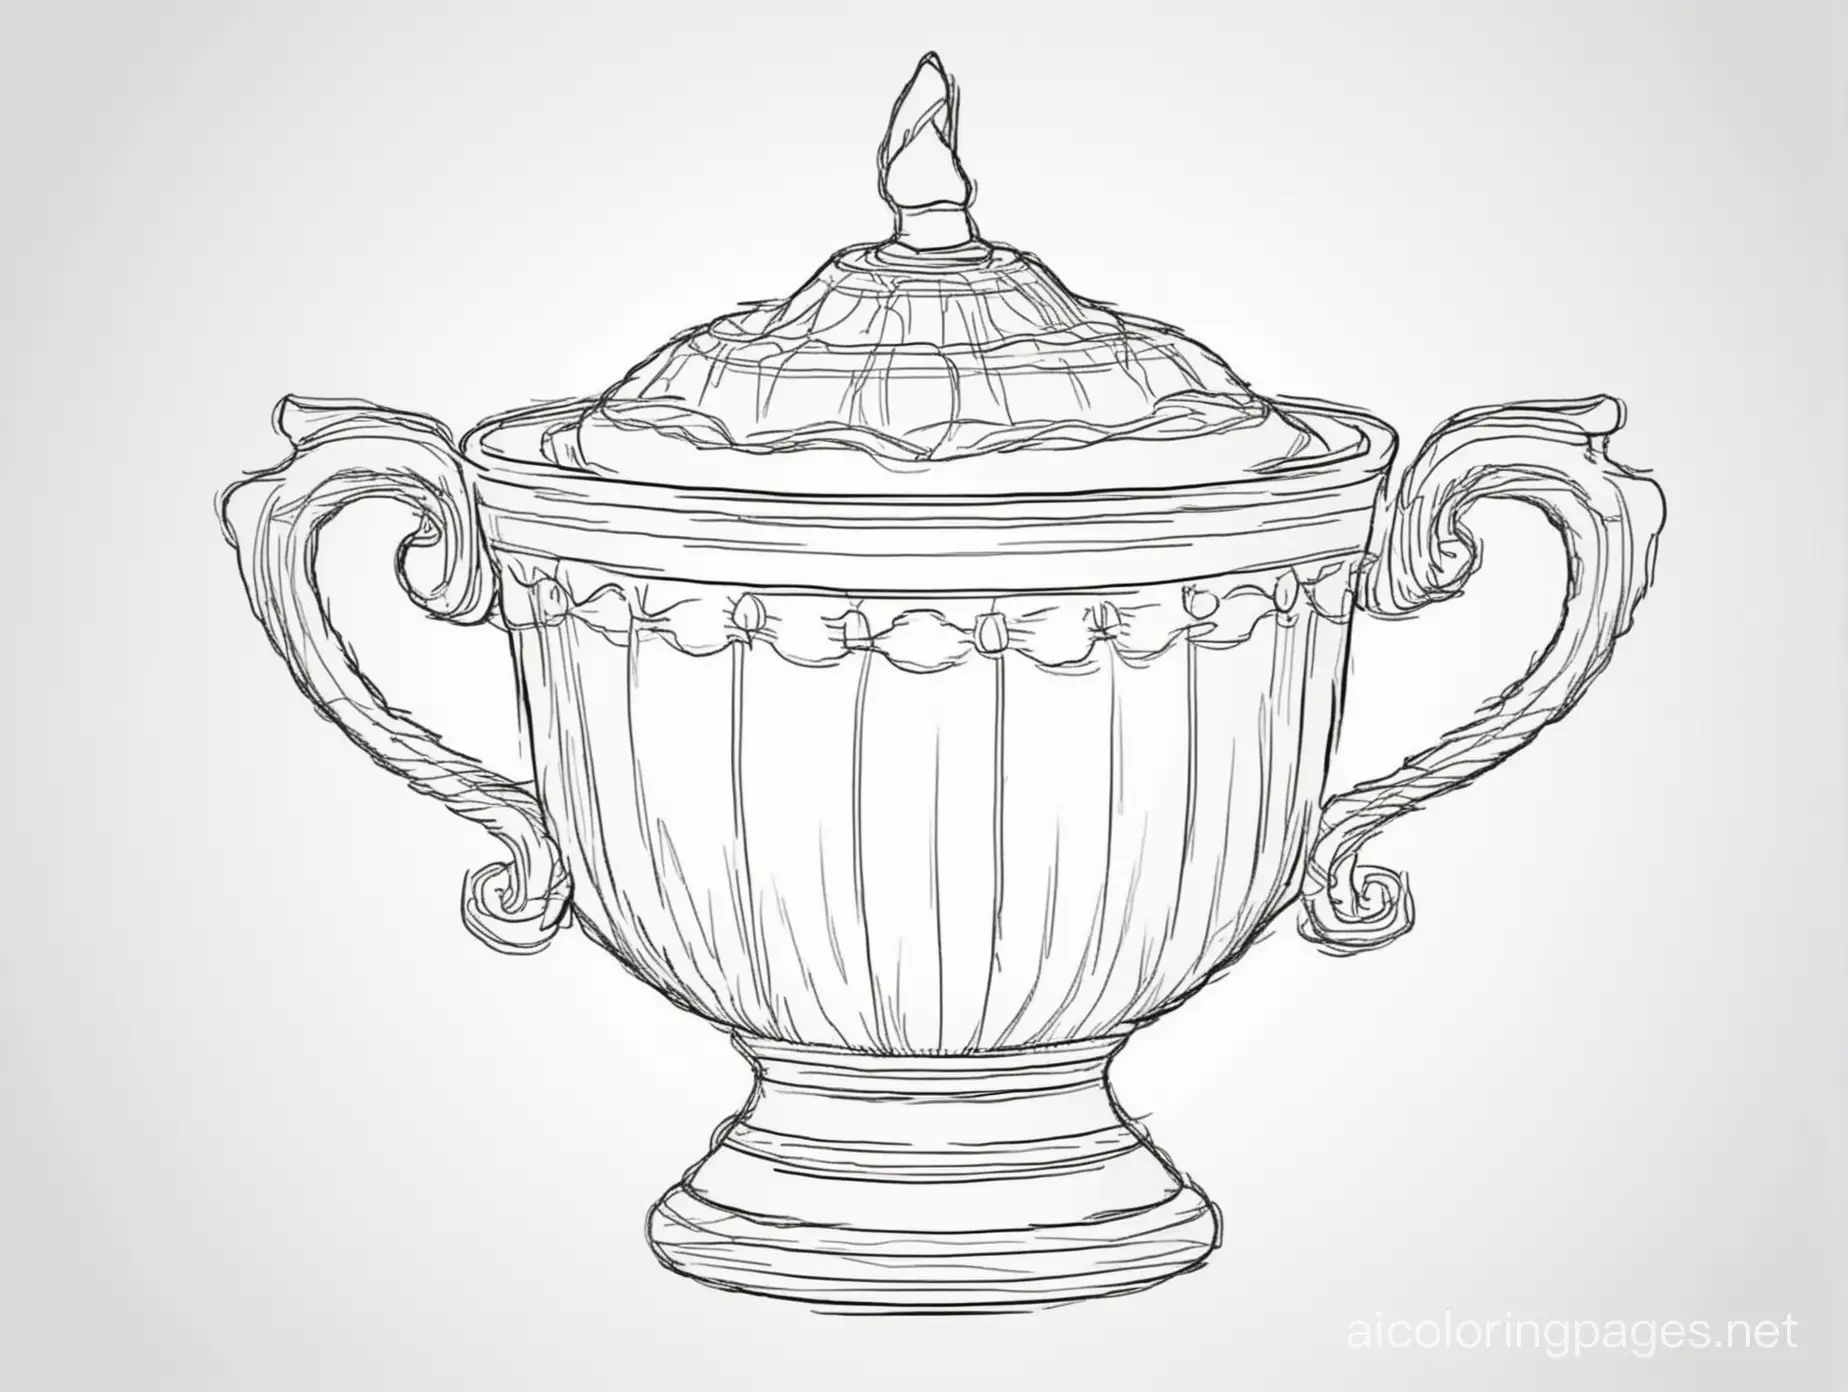 Gold-Cup-Coloring-Page-with-Black-and-White-Line-Art